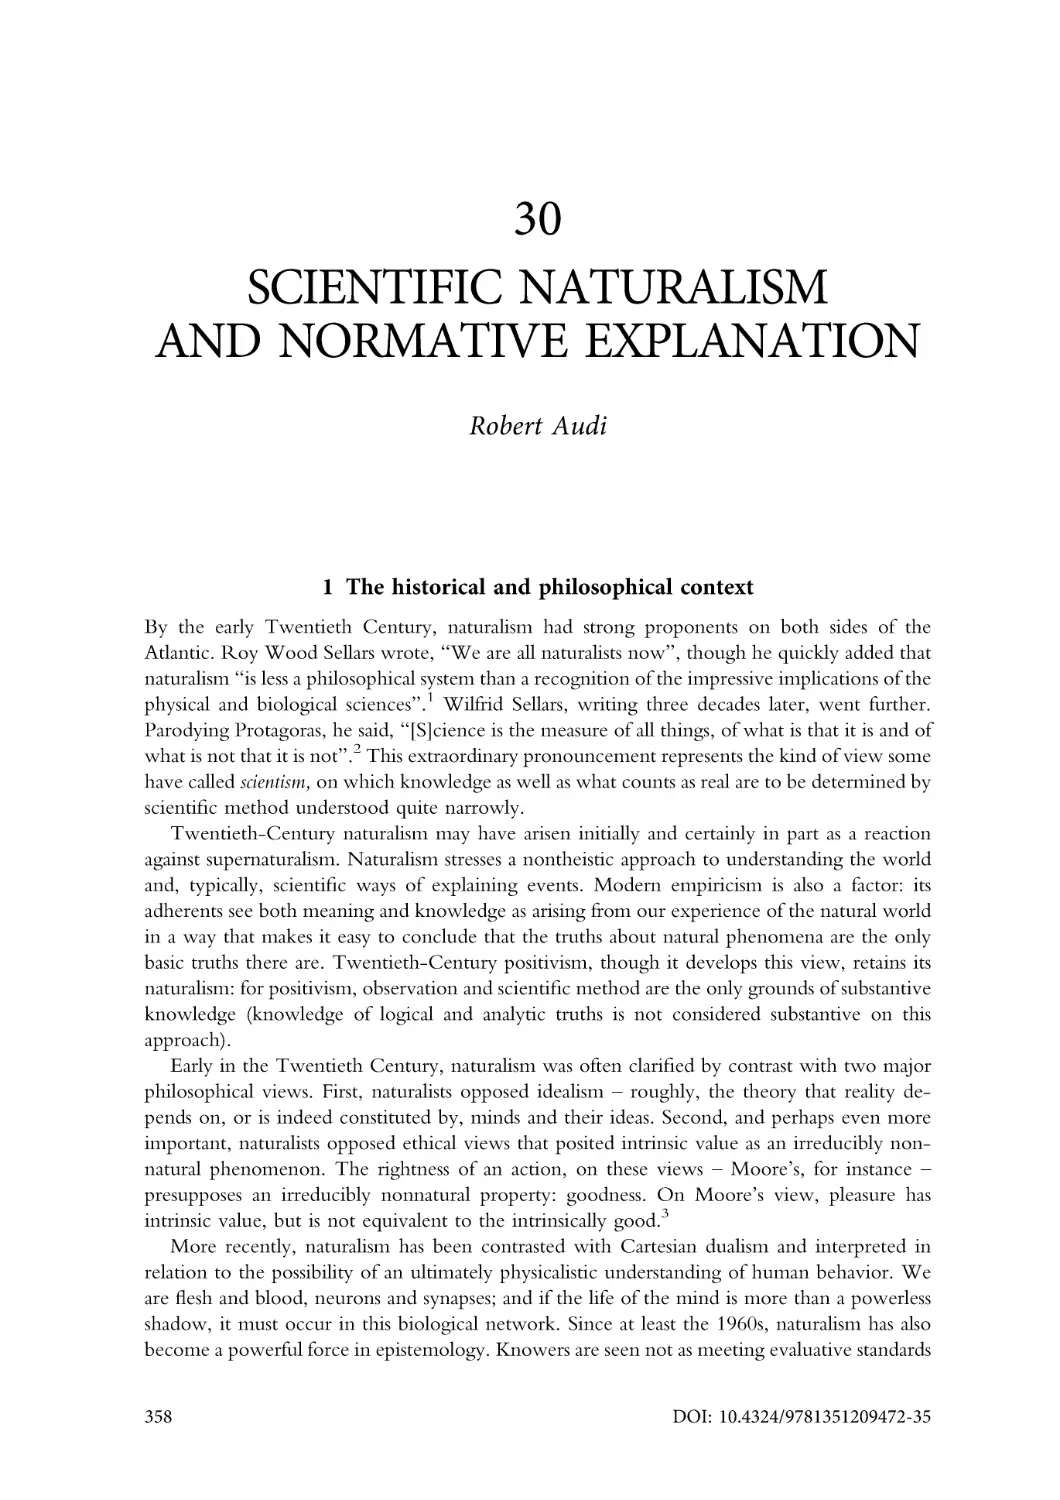 30. Scientific naturalism and normative explanation
1. The historical and philosophical context